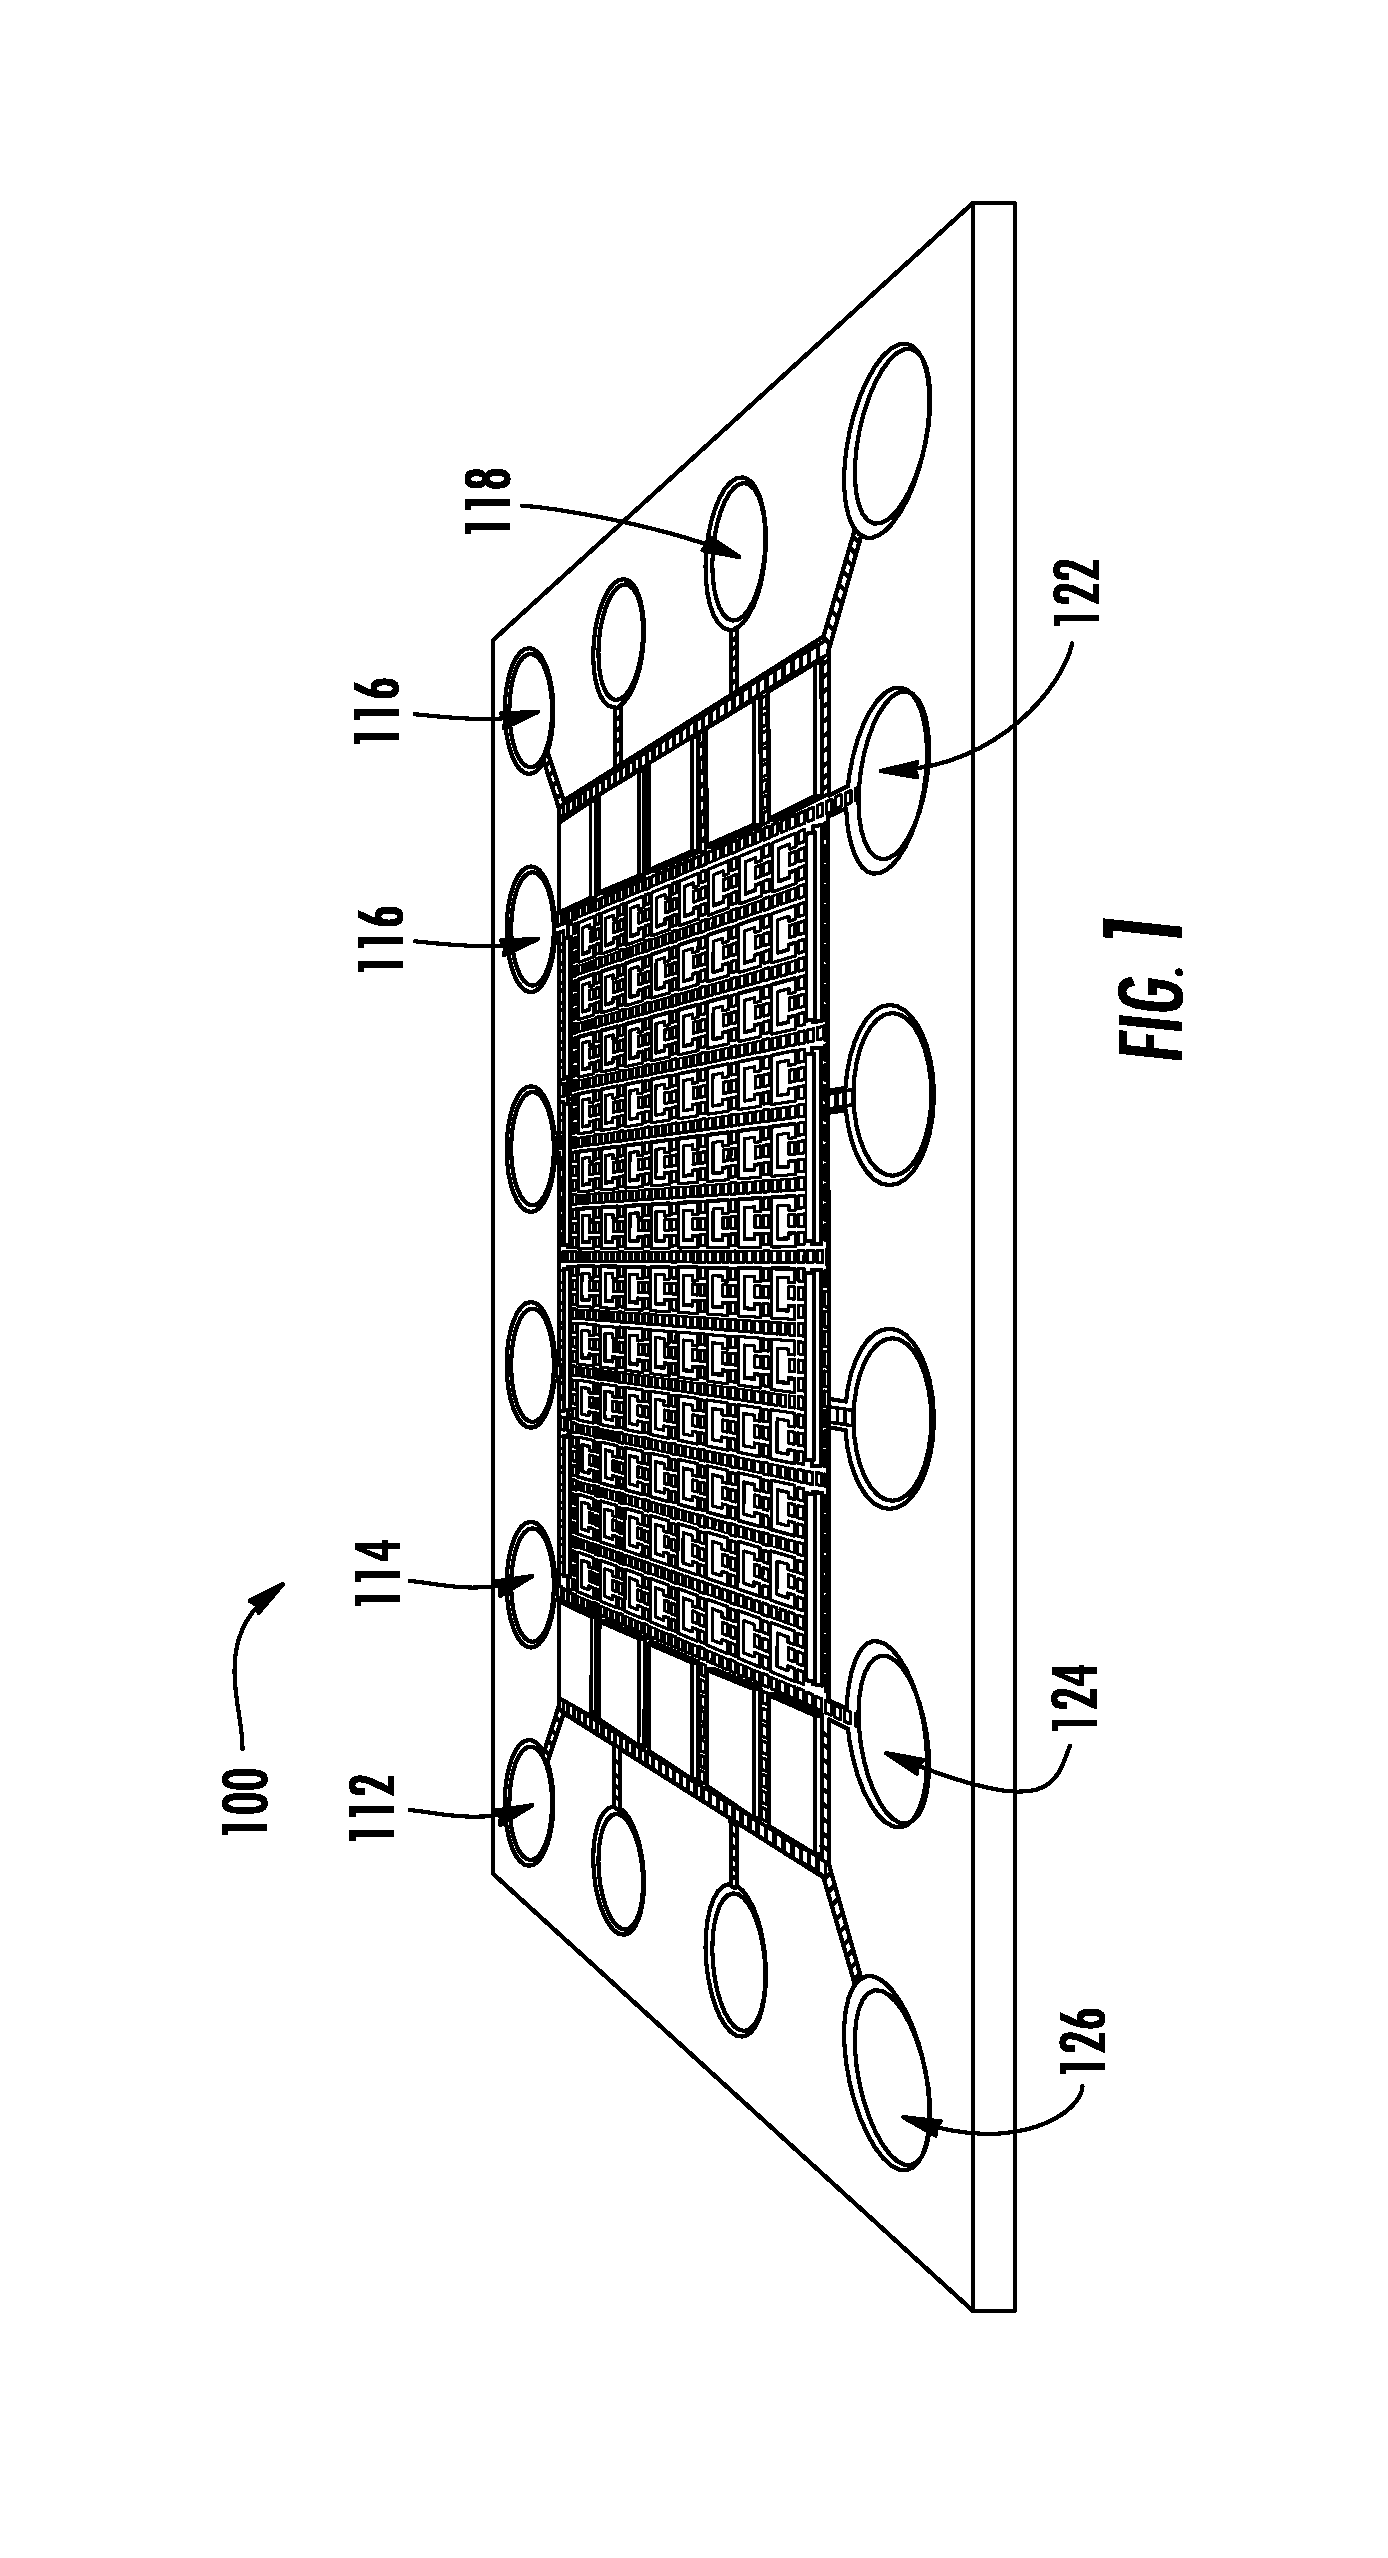 Sample Processing Droplet Actuator, System and Method